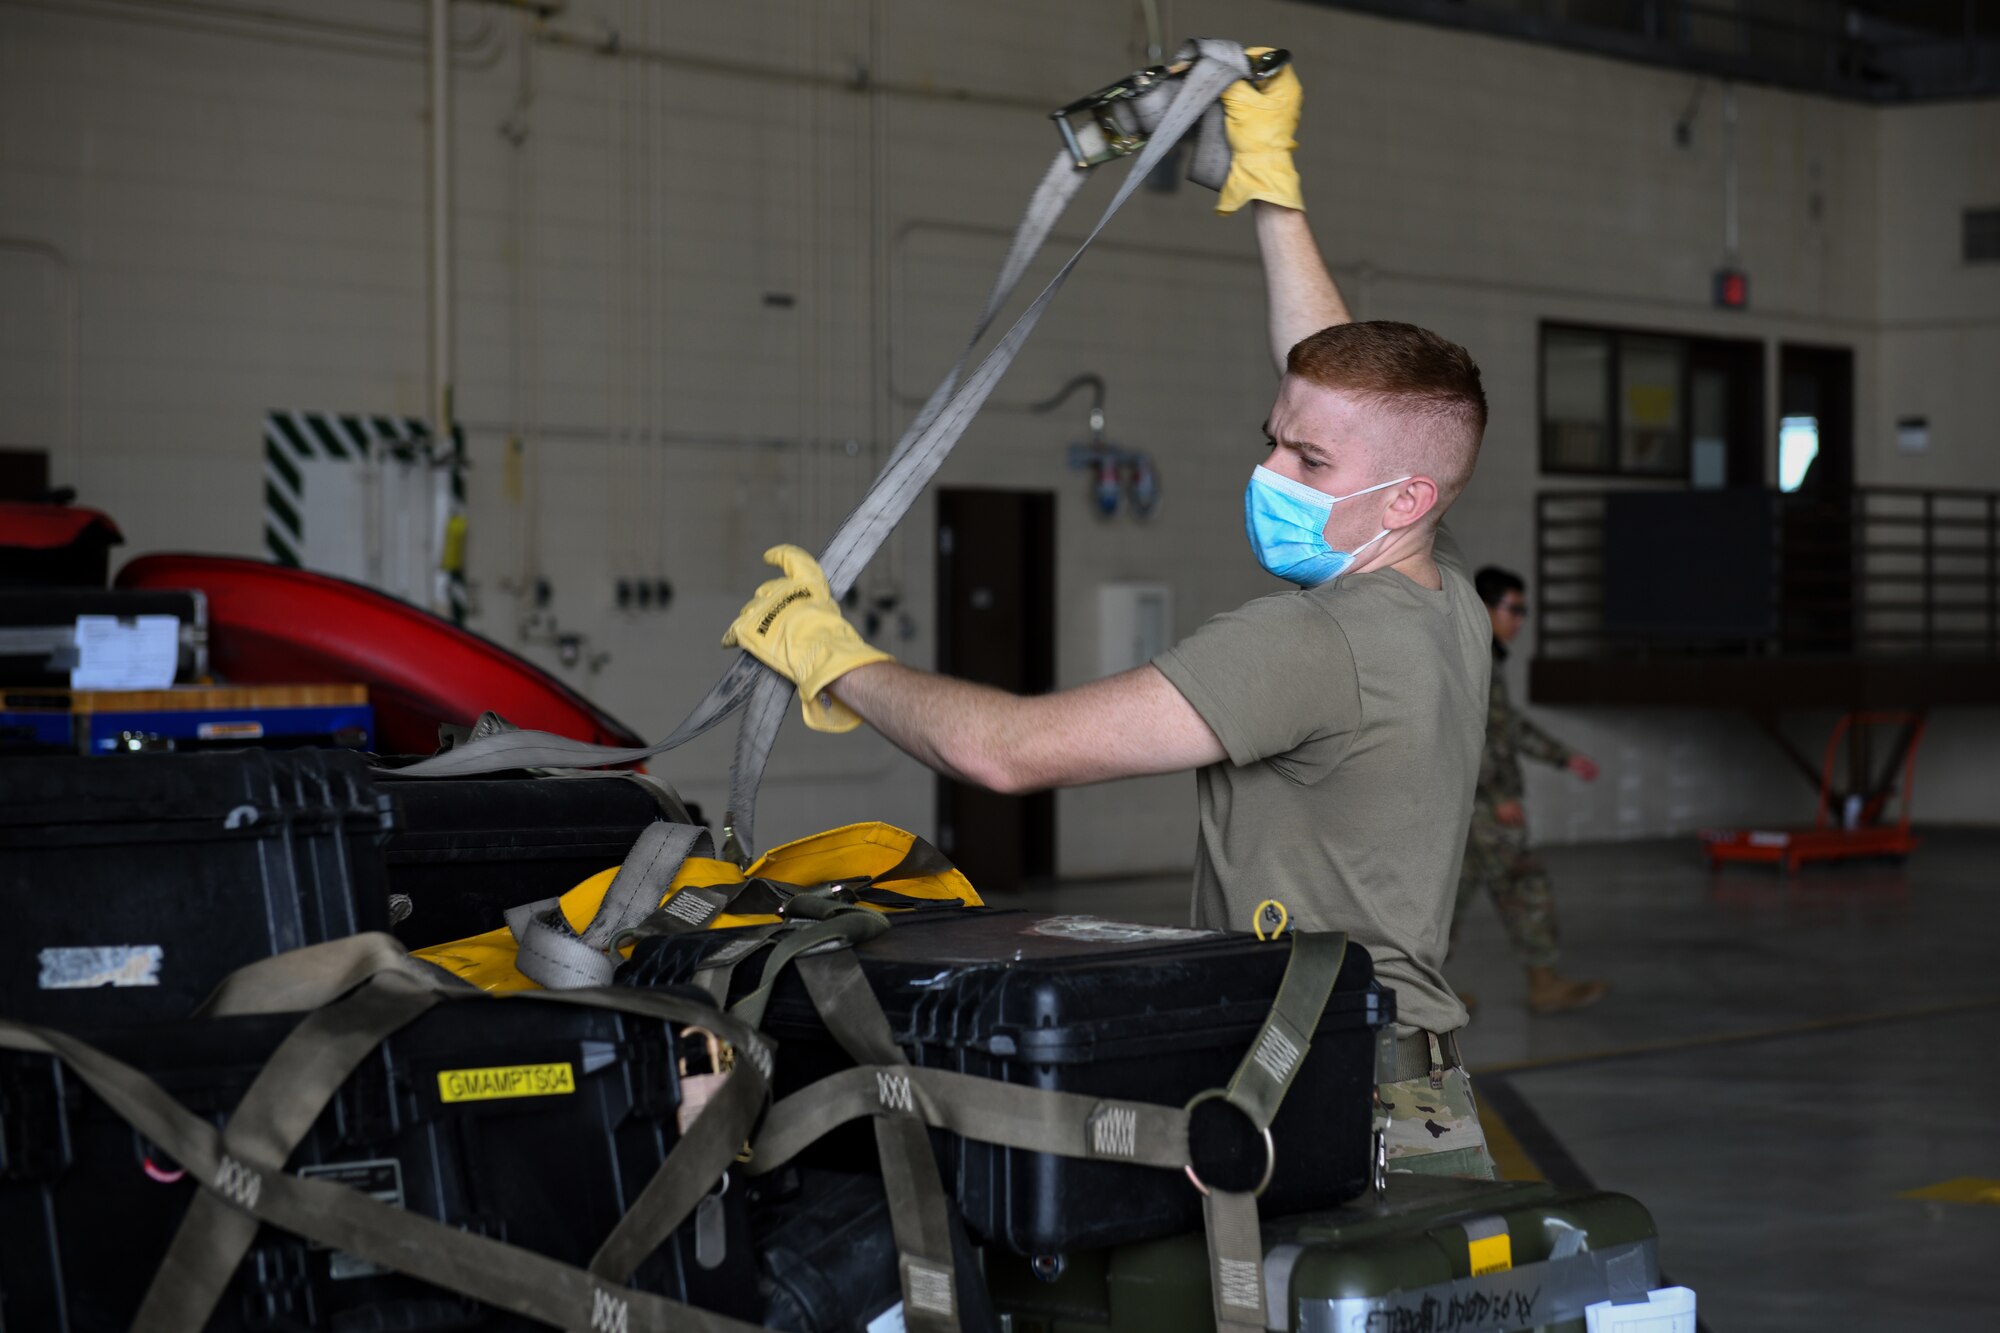 An Airman from 319th Aircraft Maintenance Squadron unfastens the lashing belts off of a pallet during an exercise on Grand Forks Air Force Base, N.D., Aug. 18, 2021. This exercise gave GFAFB Airmen hands-on experience building pallets, coordinating hazardous materials declarations and learning how to meet the mission despite limiting factors. (U.S. Air Force photo by Airman 1st Class Ashley Richards)